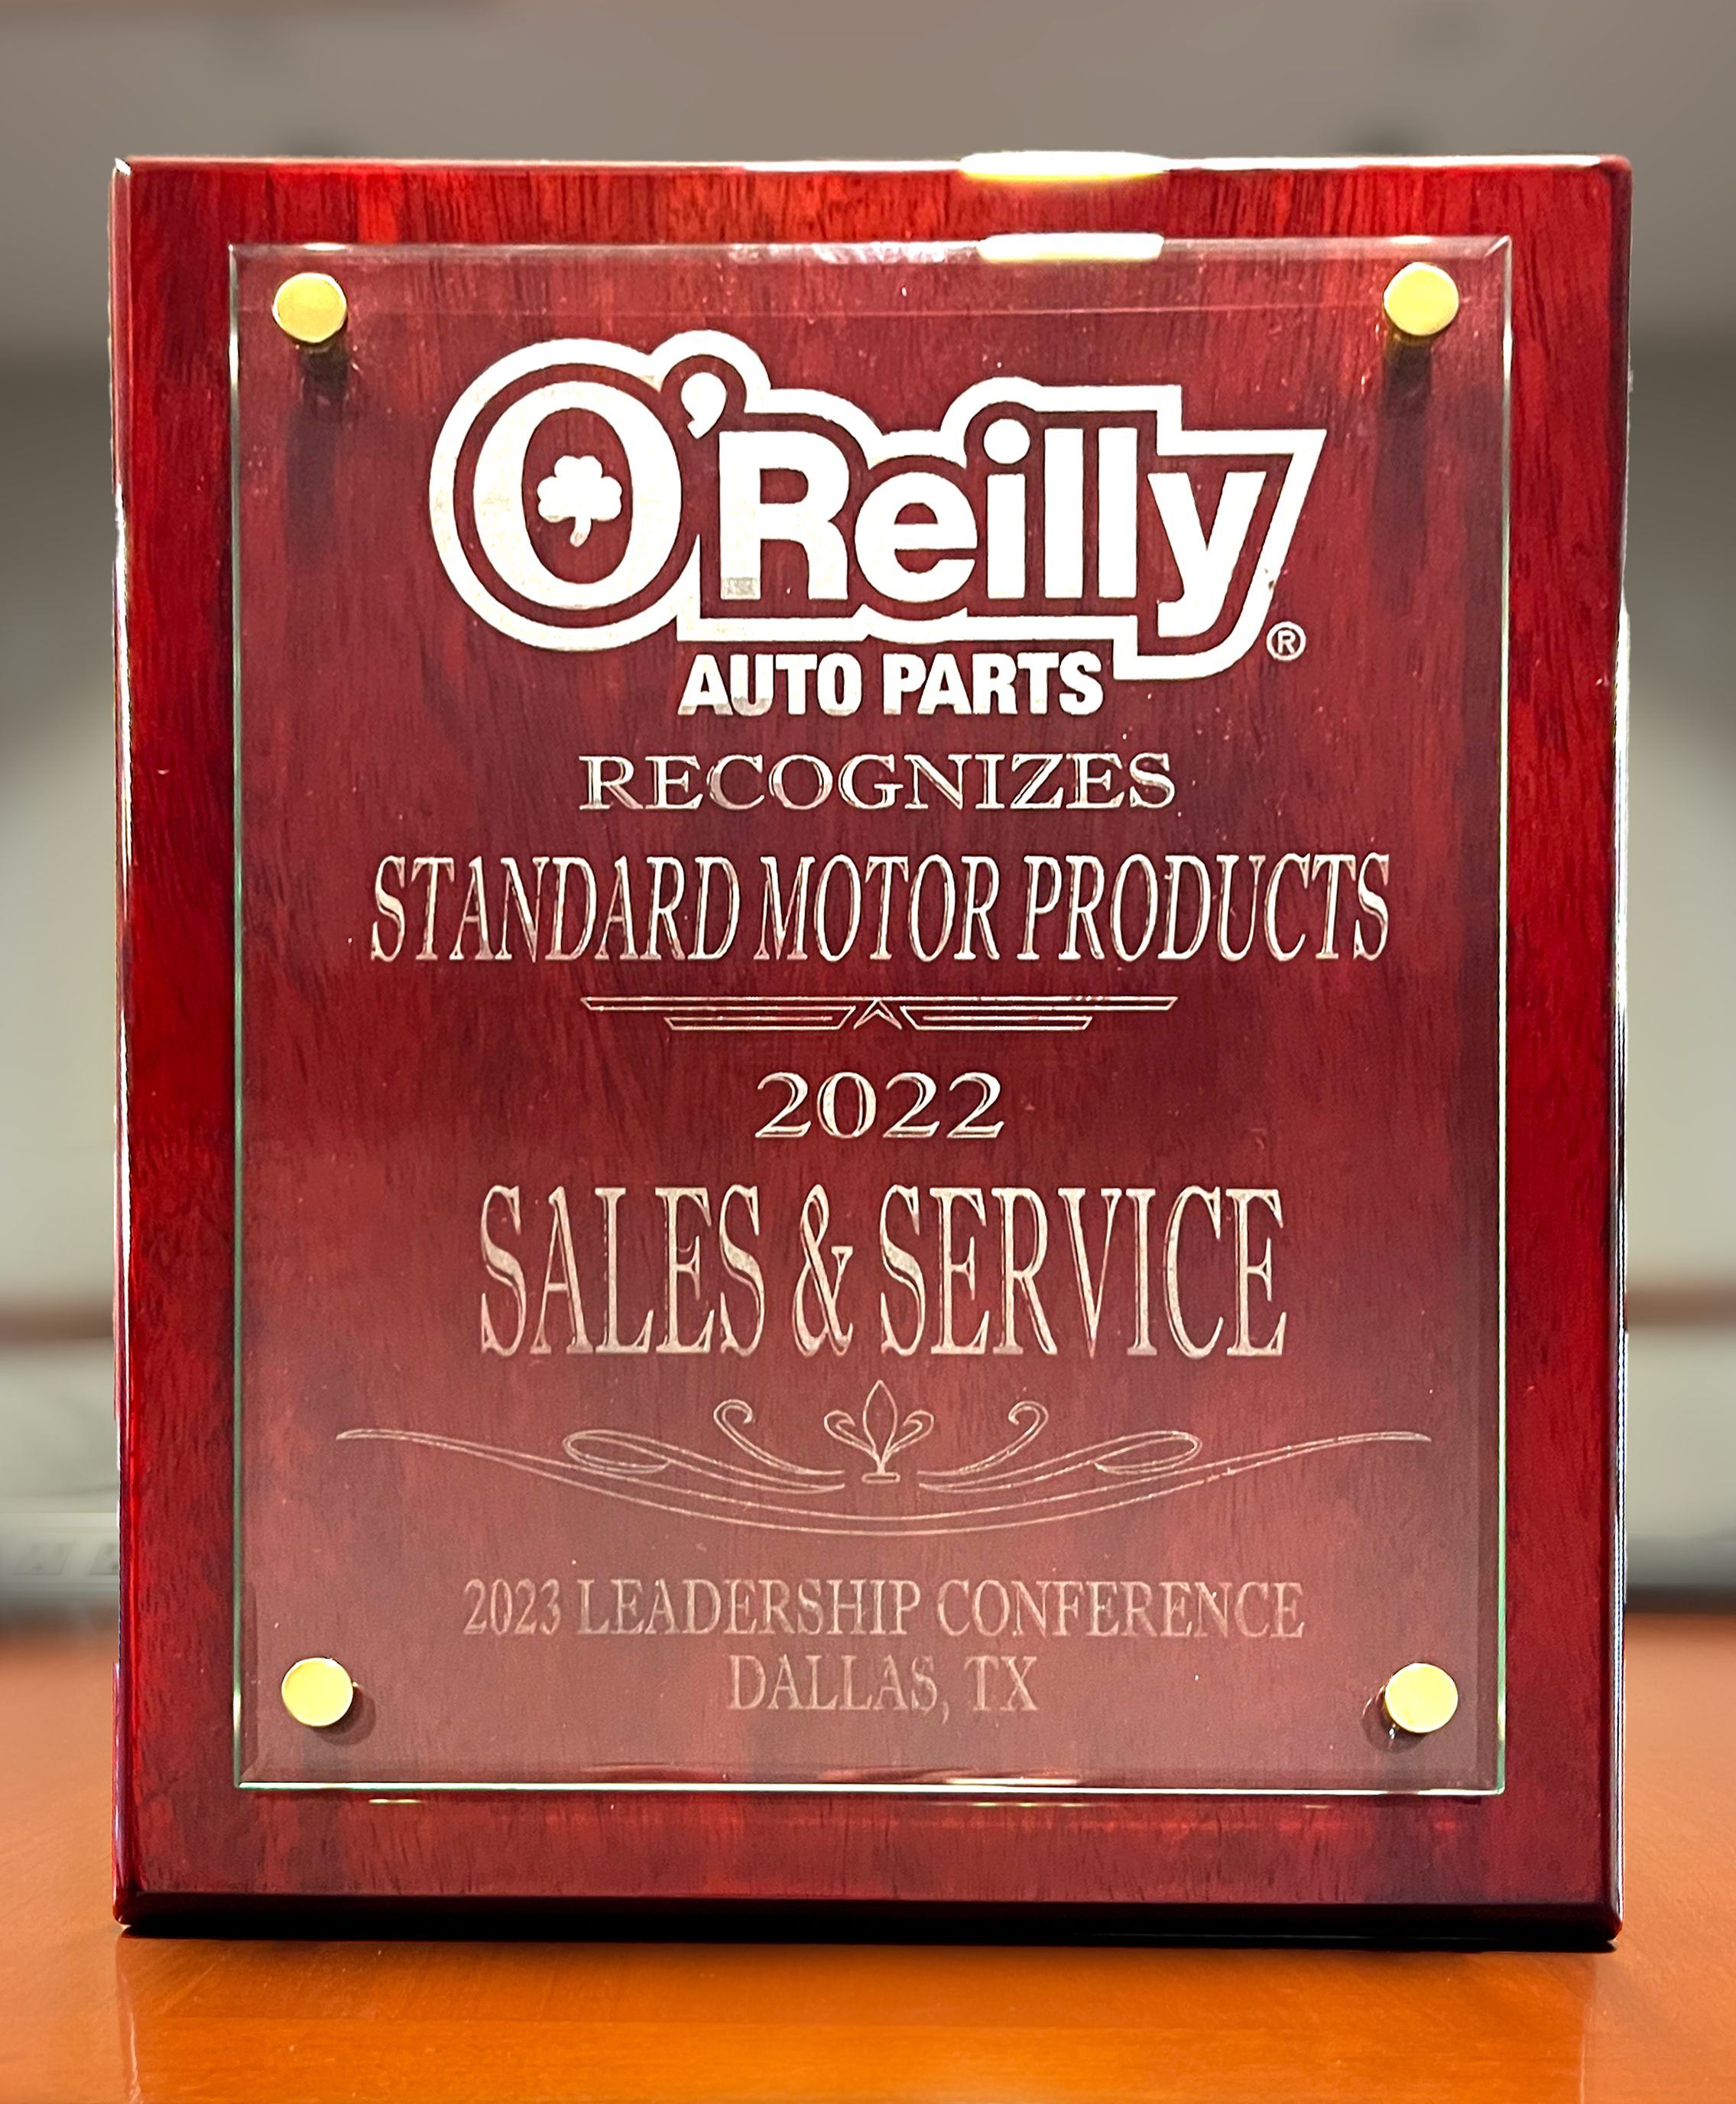 SMP Receives O'Reilly's 2022 Service and Sales Supplier of the Year Award